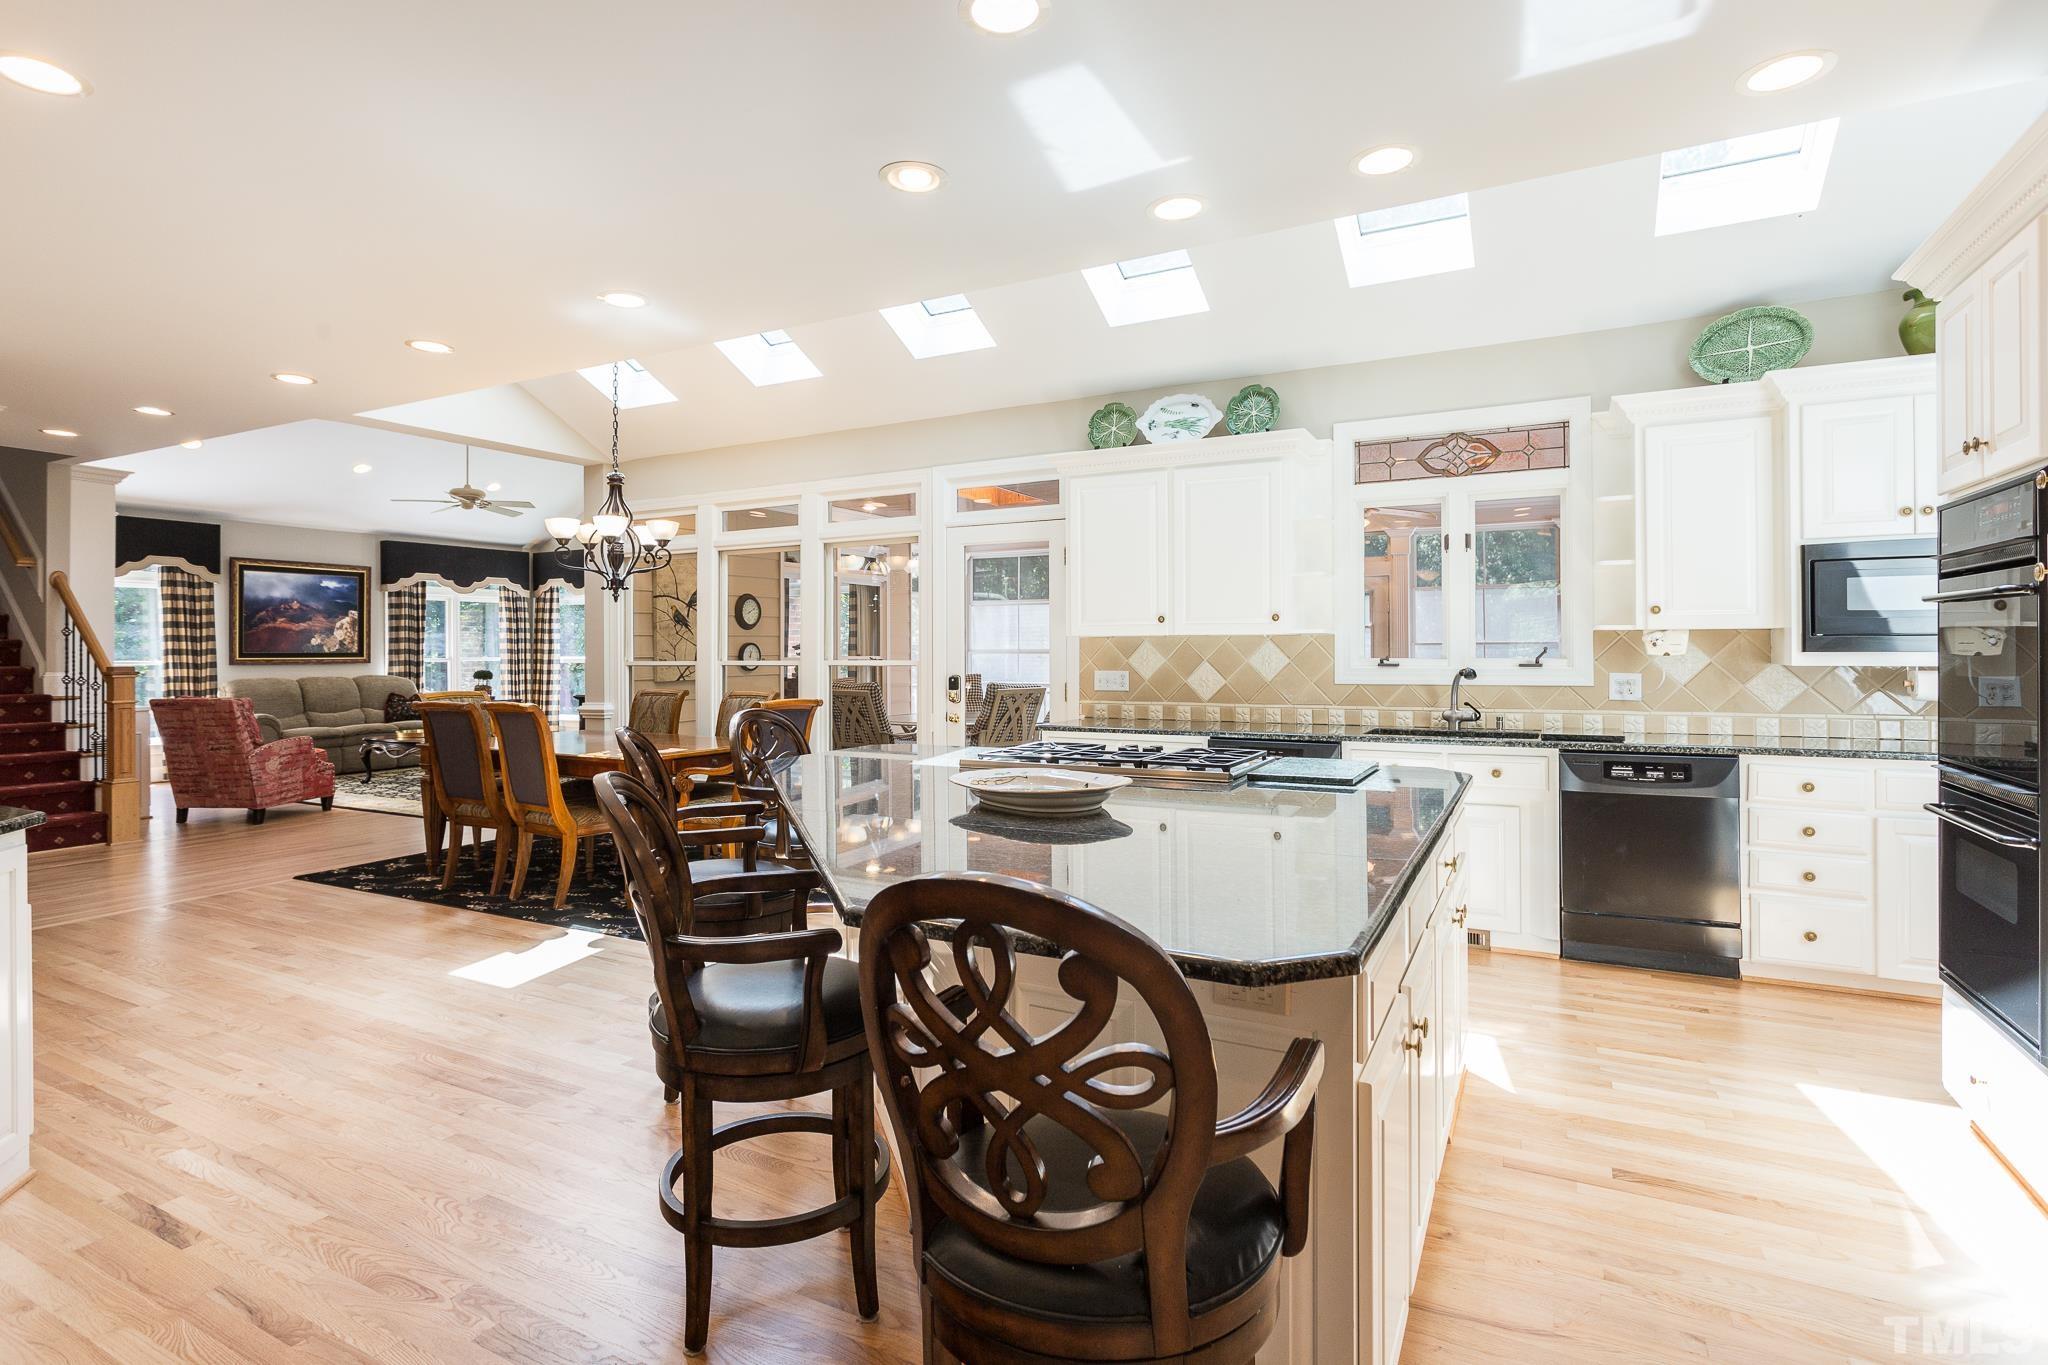 The spacious breakfast room located between the kitchen and family room can easily fit a table to seat 6-8 people.